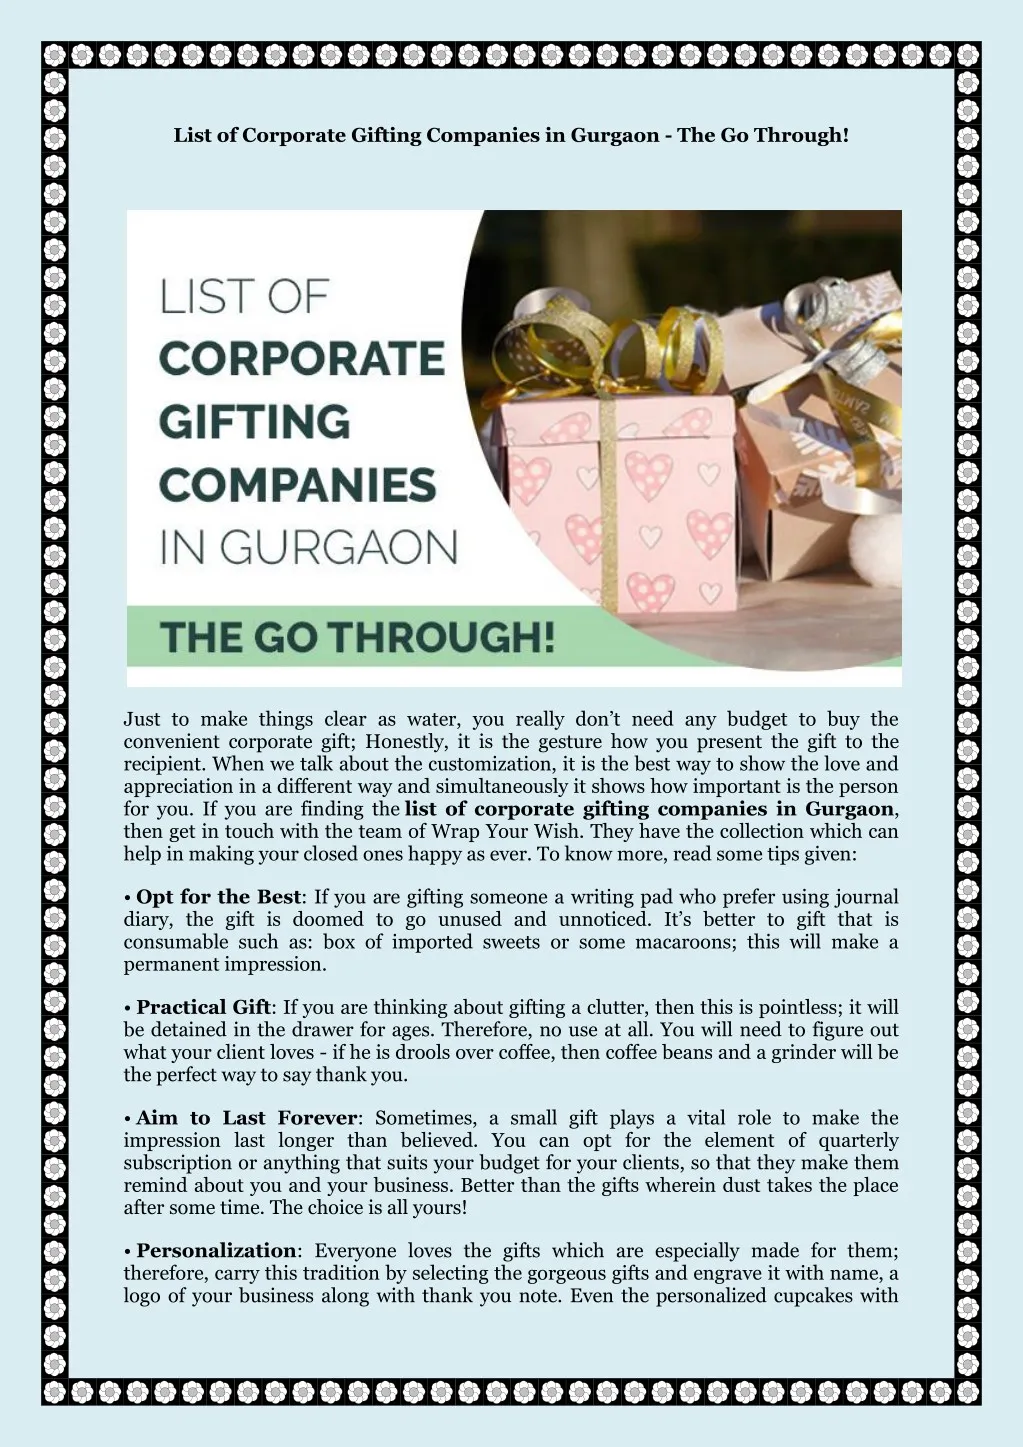 list of corporate gifting companies in gurgaon